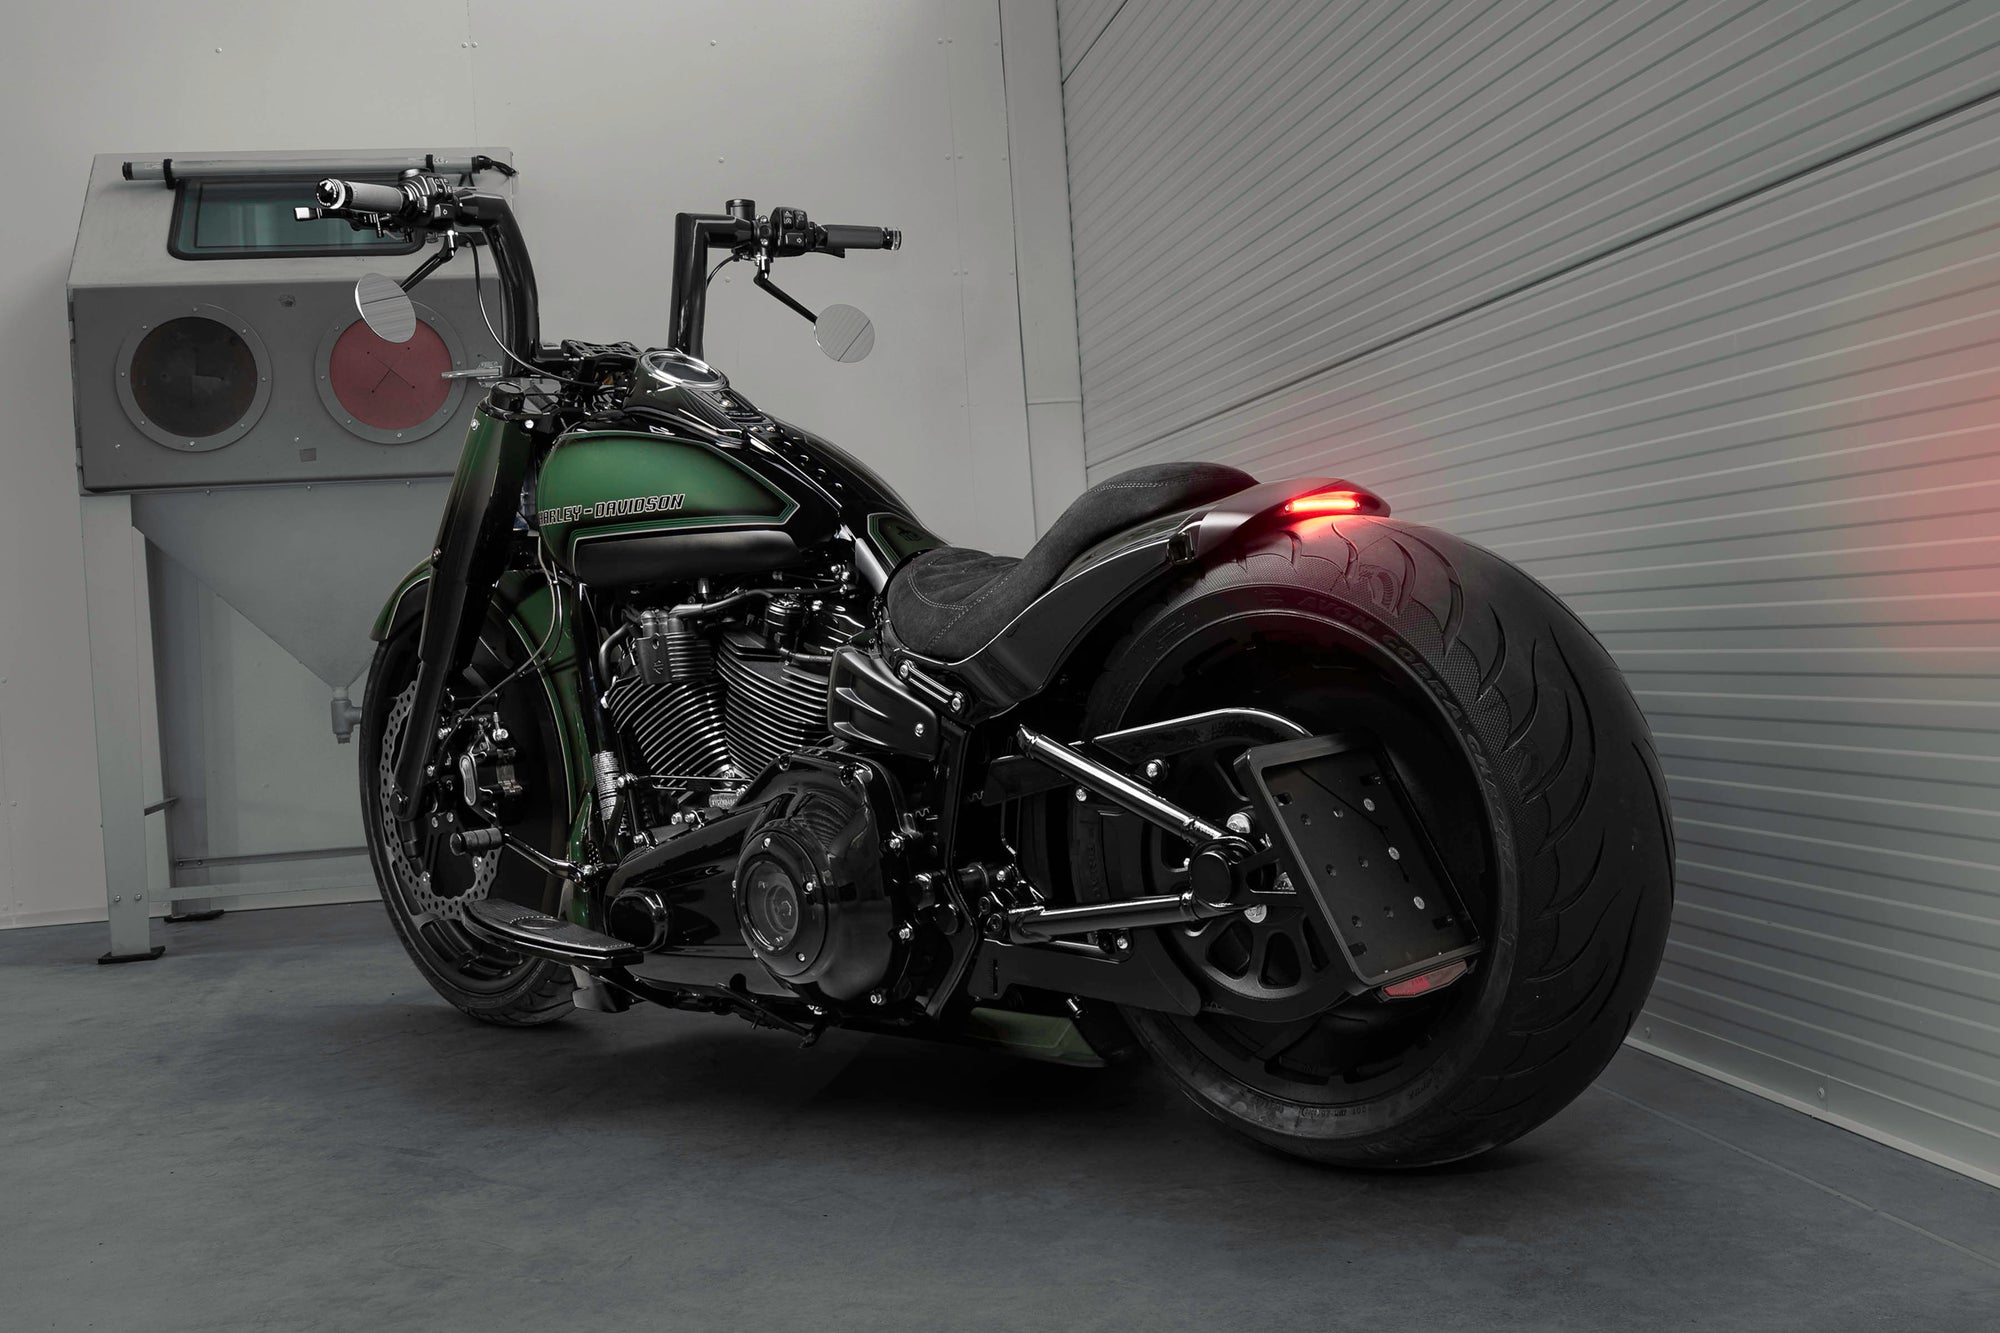 Modified Harley Davidson Fat Boy motorcycle with Killer Custom parts from the side in a spacious and modern garage